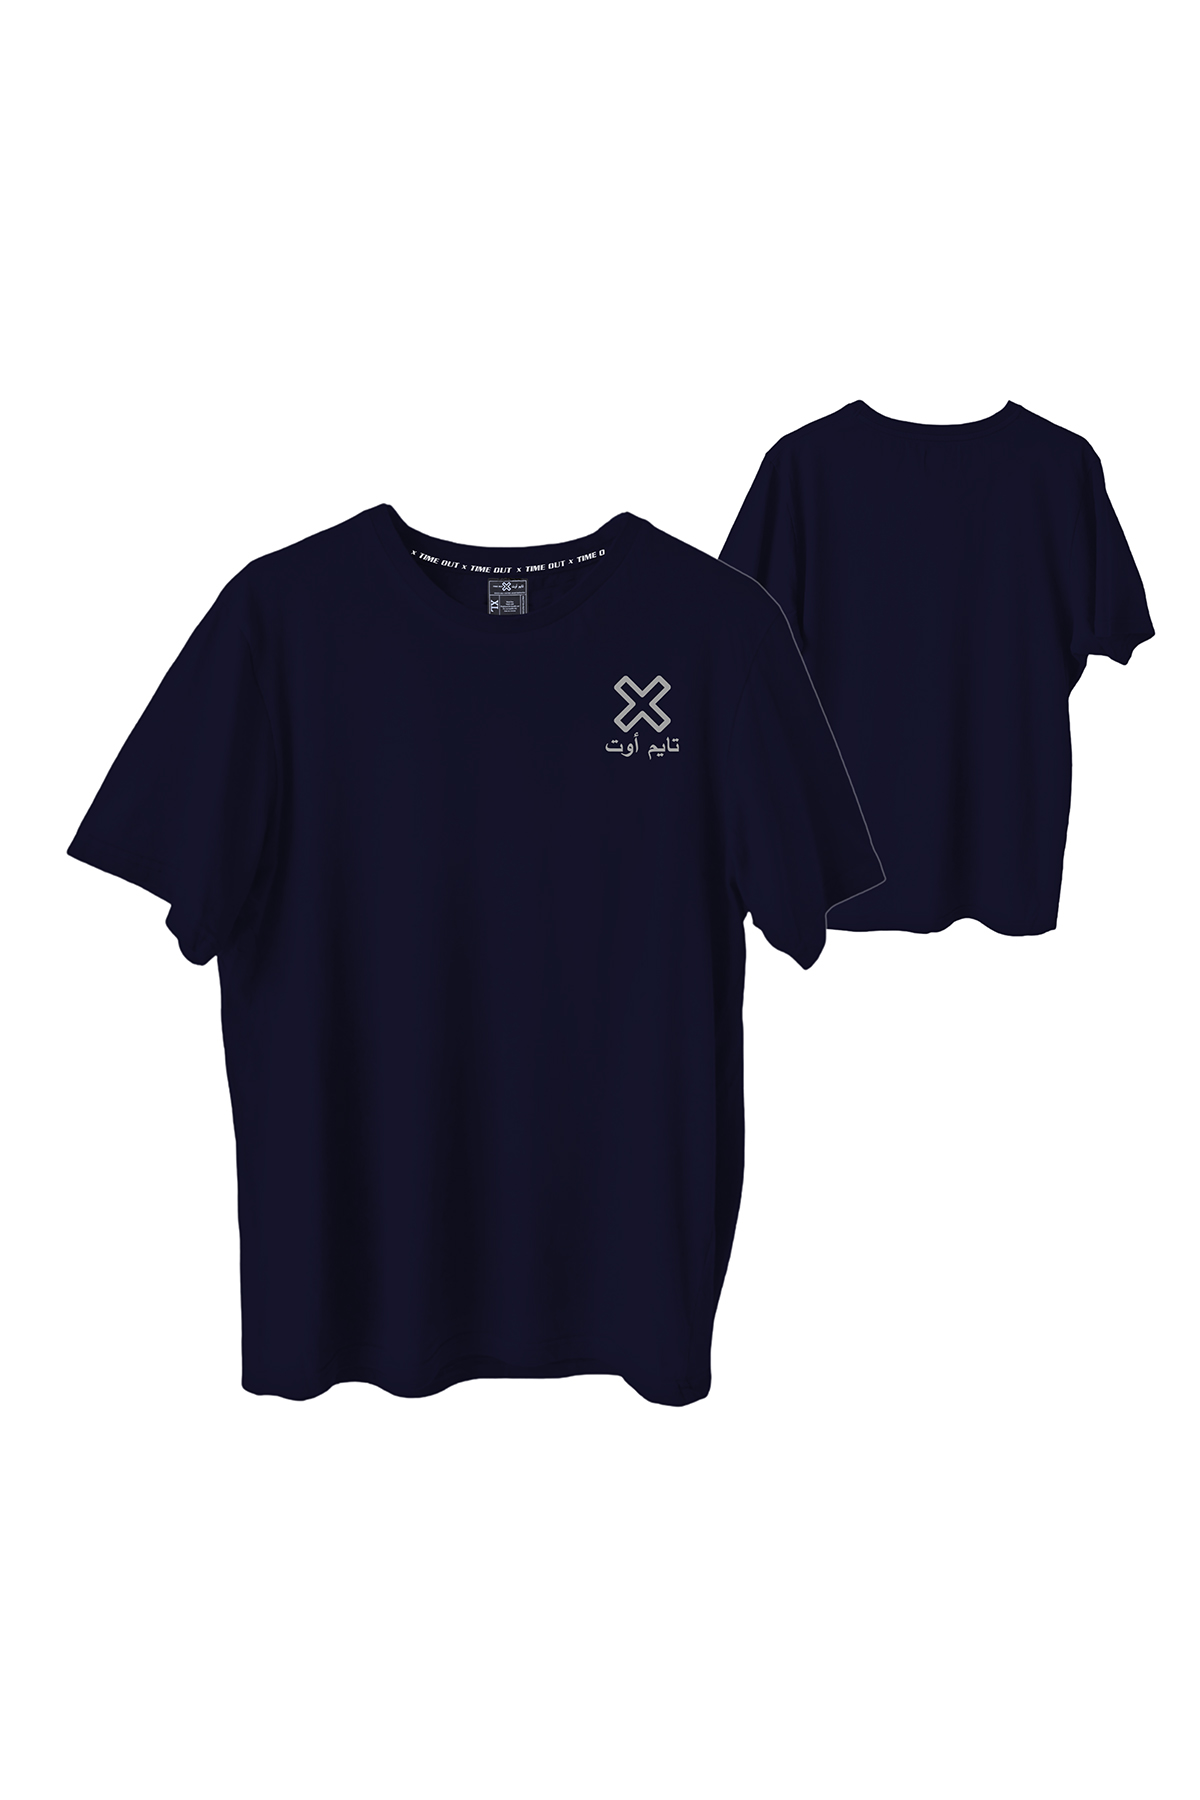 Time-Out-X-Signature-Short-Sleeve-Classic-Training-T-Shirt—Navy-Blue—Front-and-Back